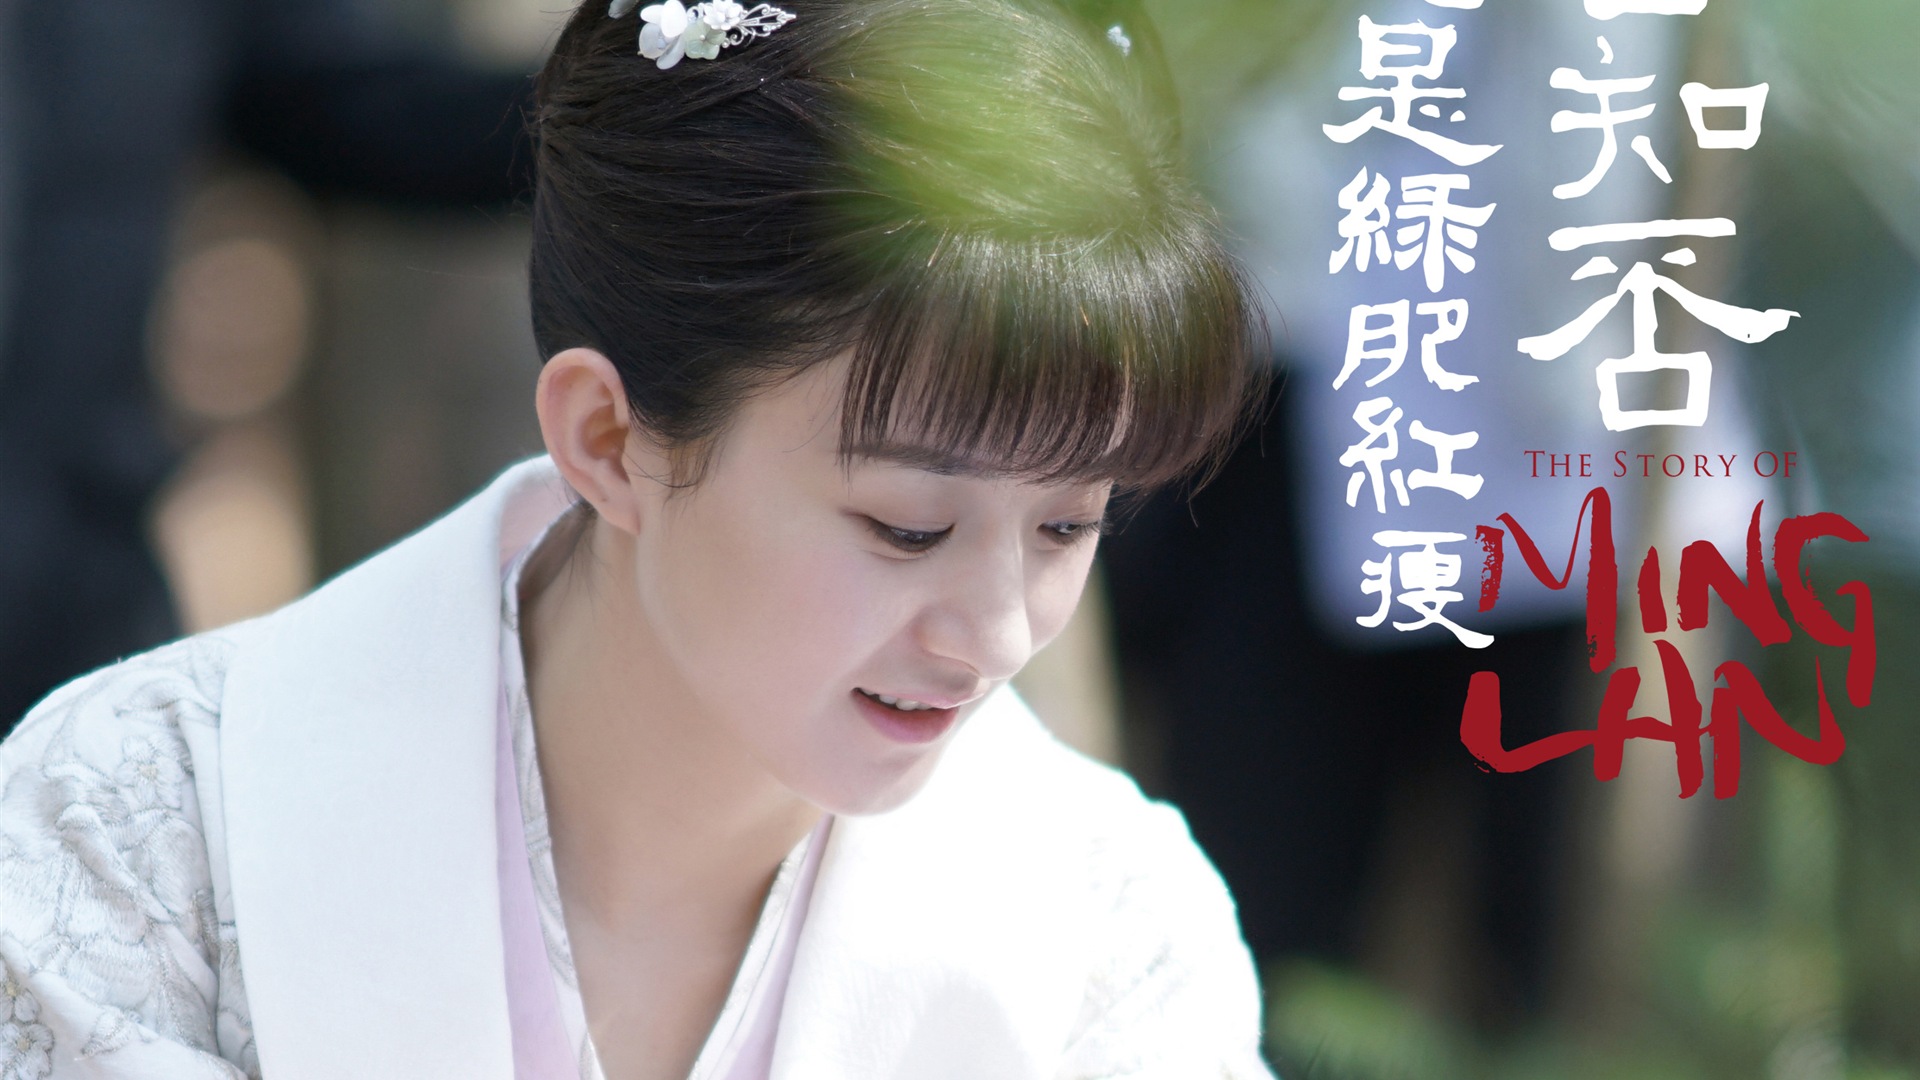 The Story Of MingLan, TV series HD wallpapers #27 - 1920x1080